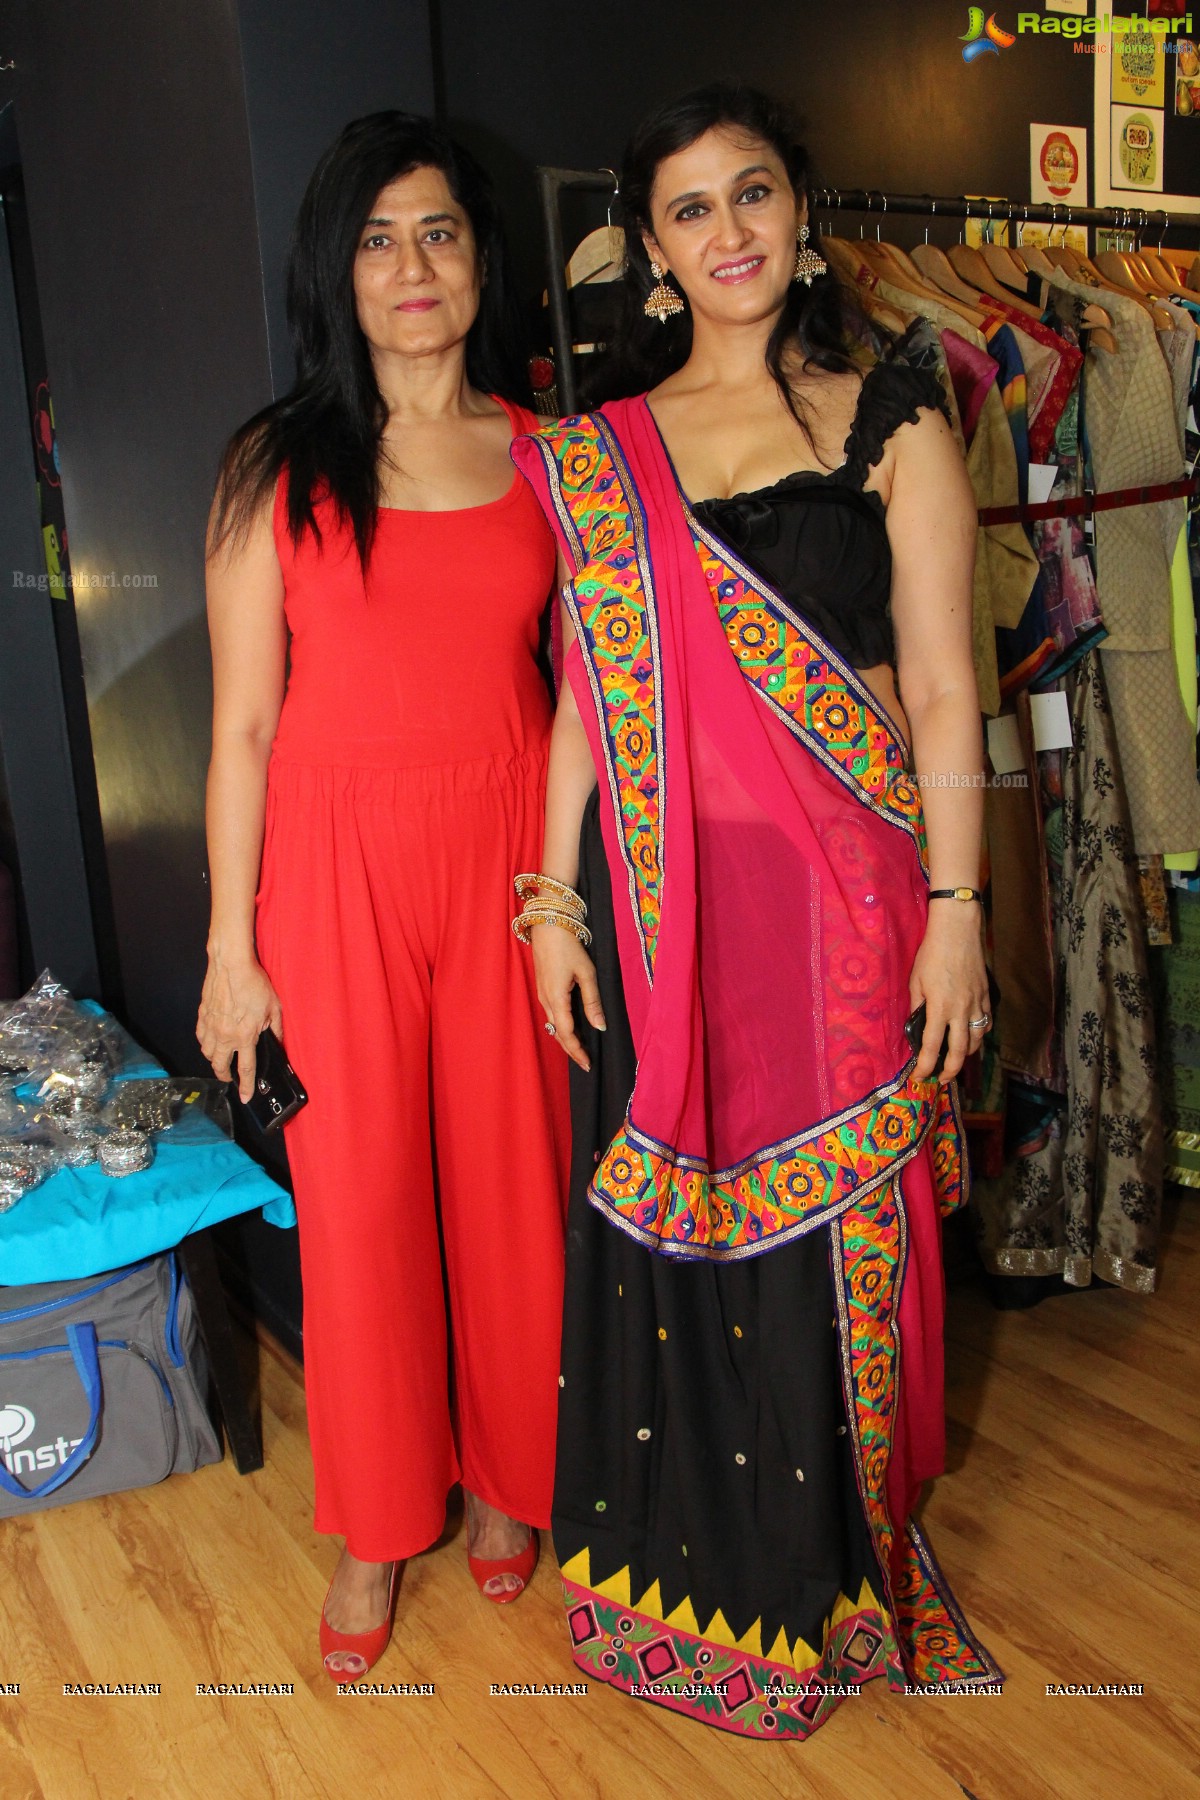 Raas Leela.. Love Story Of Women and Clothes by Sheetall Nahata